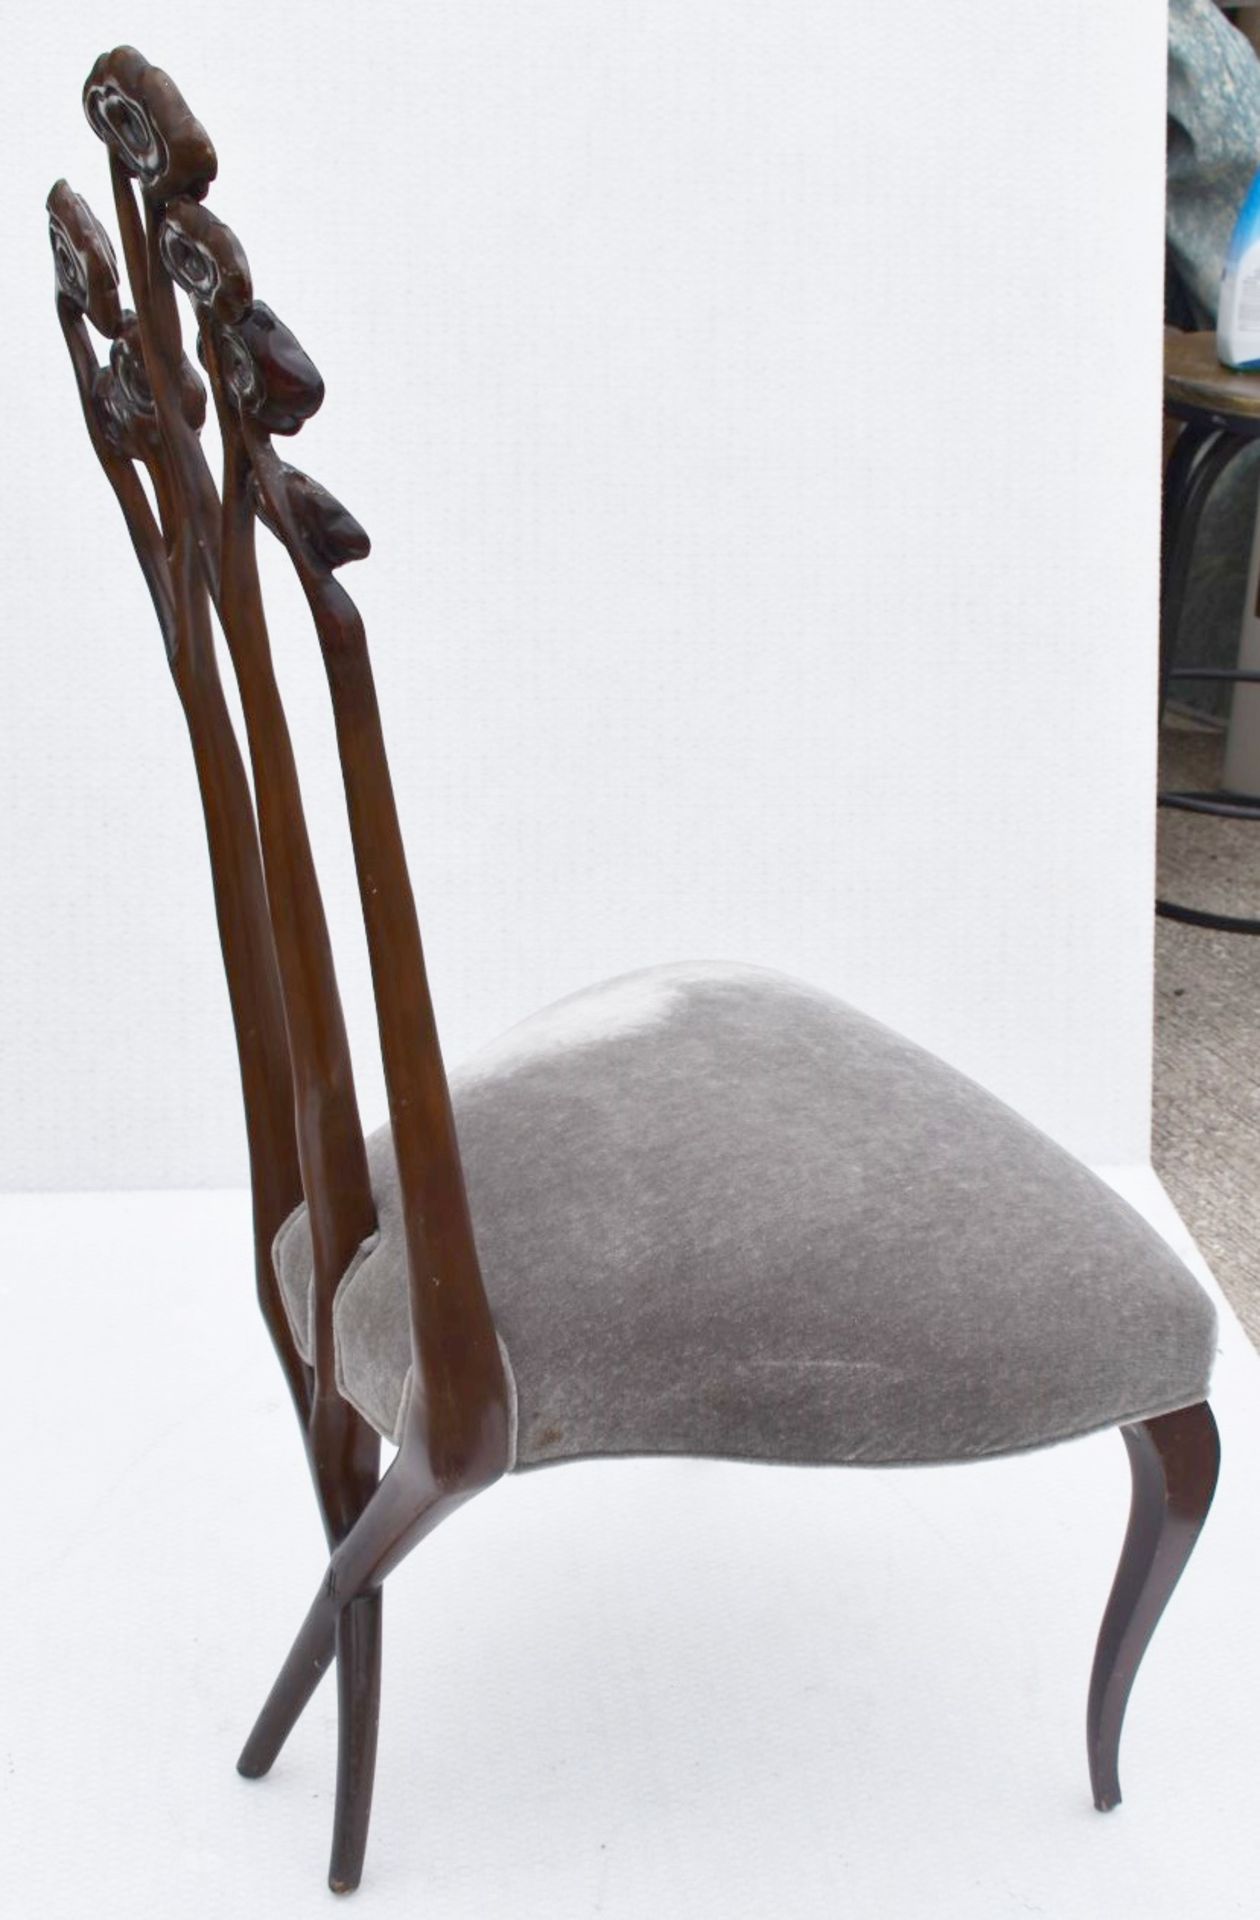 1 x CHRISTOPHER GUY 'Le Jardin' Luxury Hand-carved Solid Mahogany Designer Dining Chair - Recently - Image 7 of 11